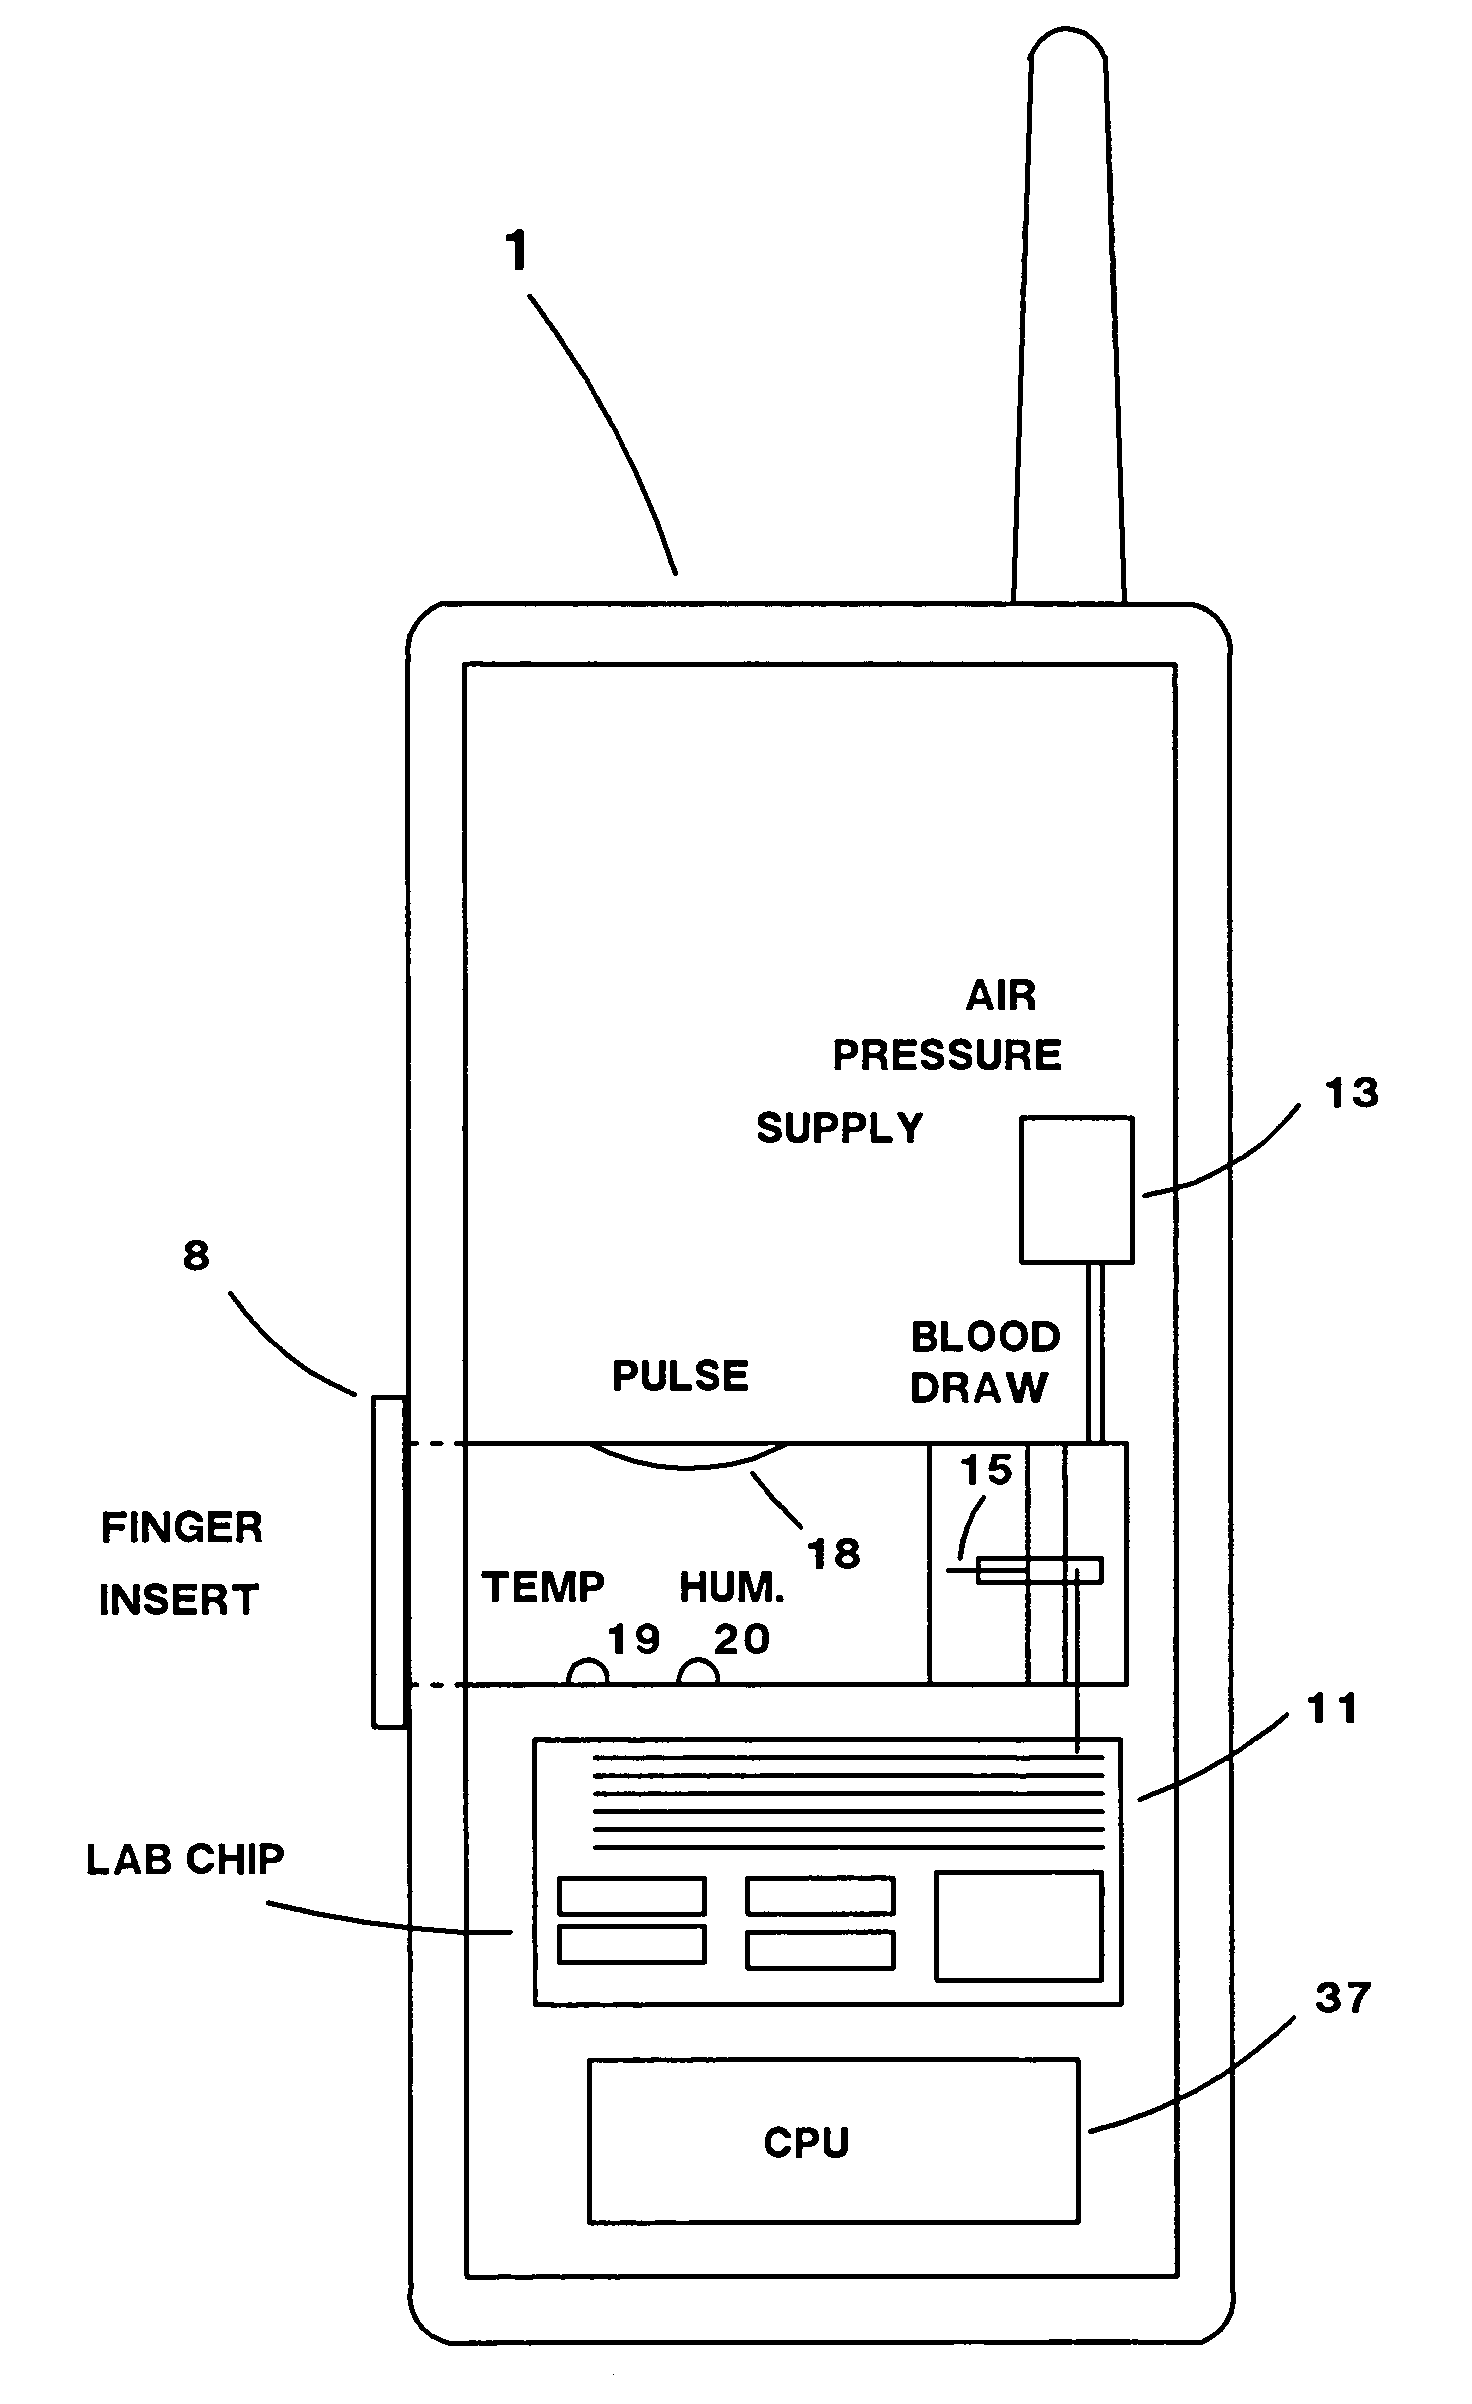 Emergency medical diagnosis and communications device